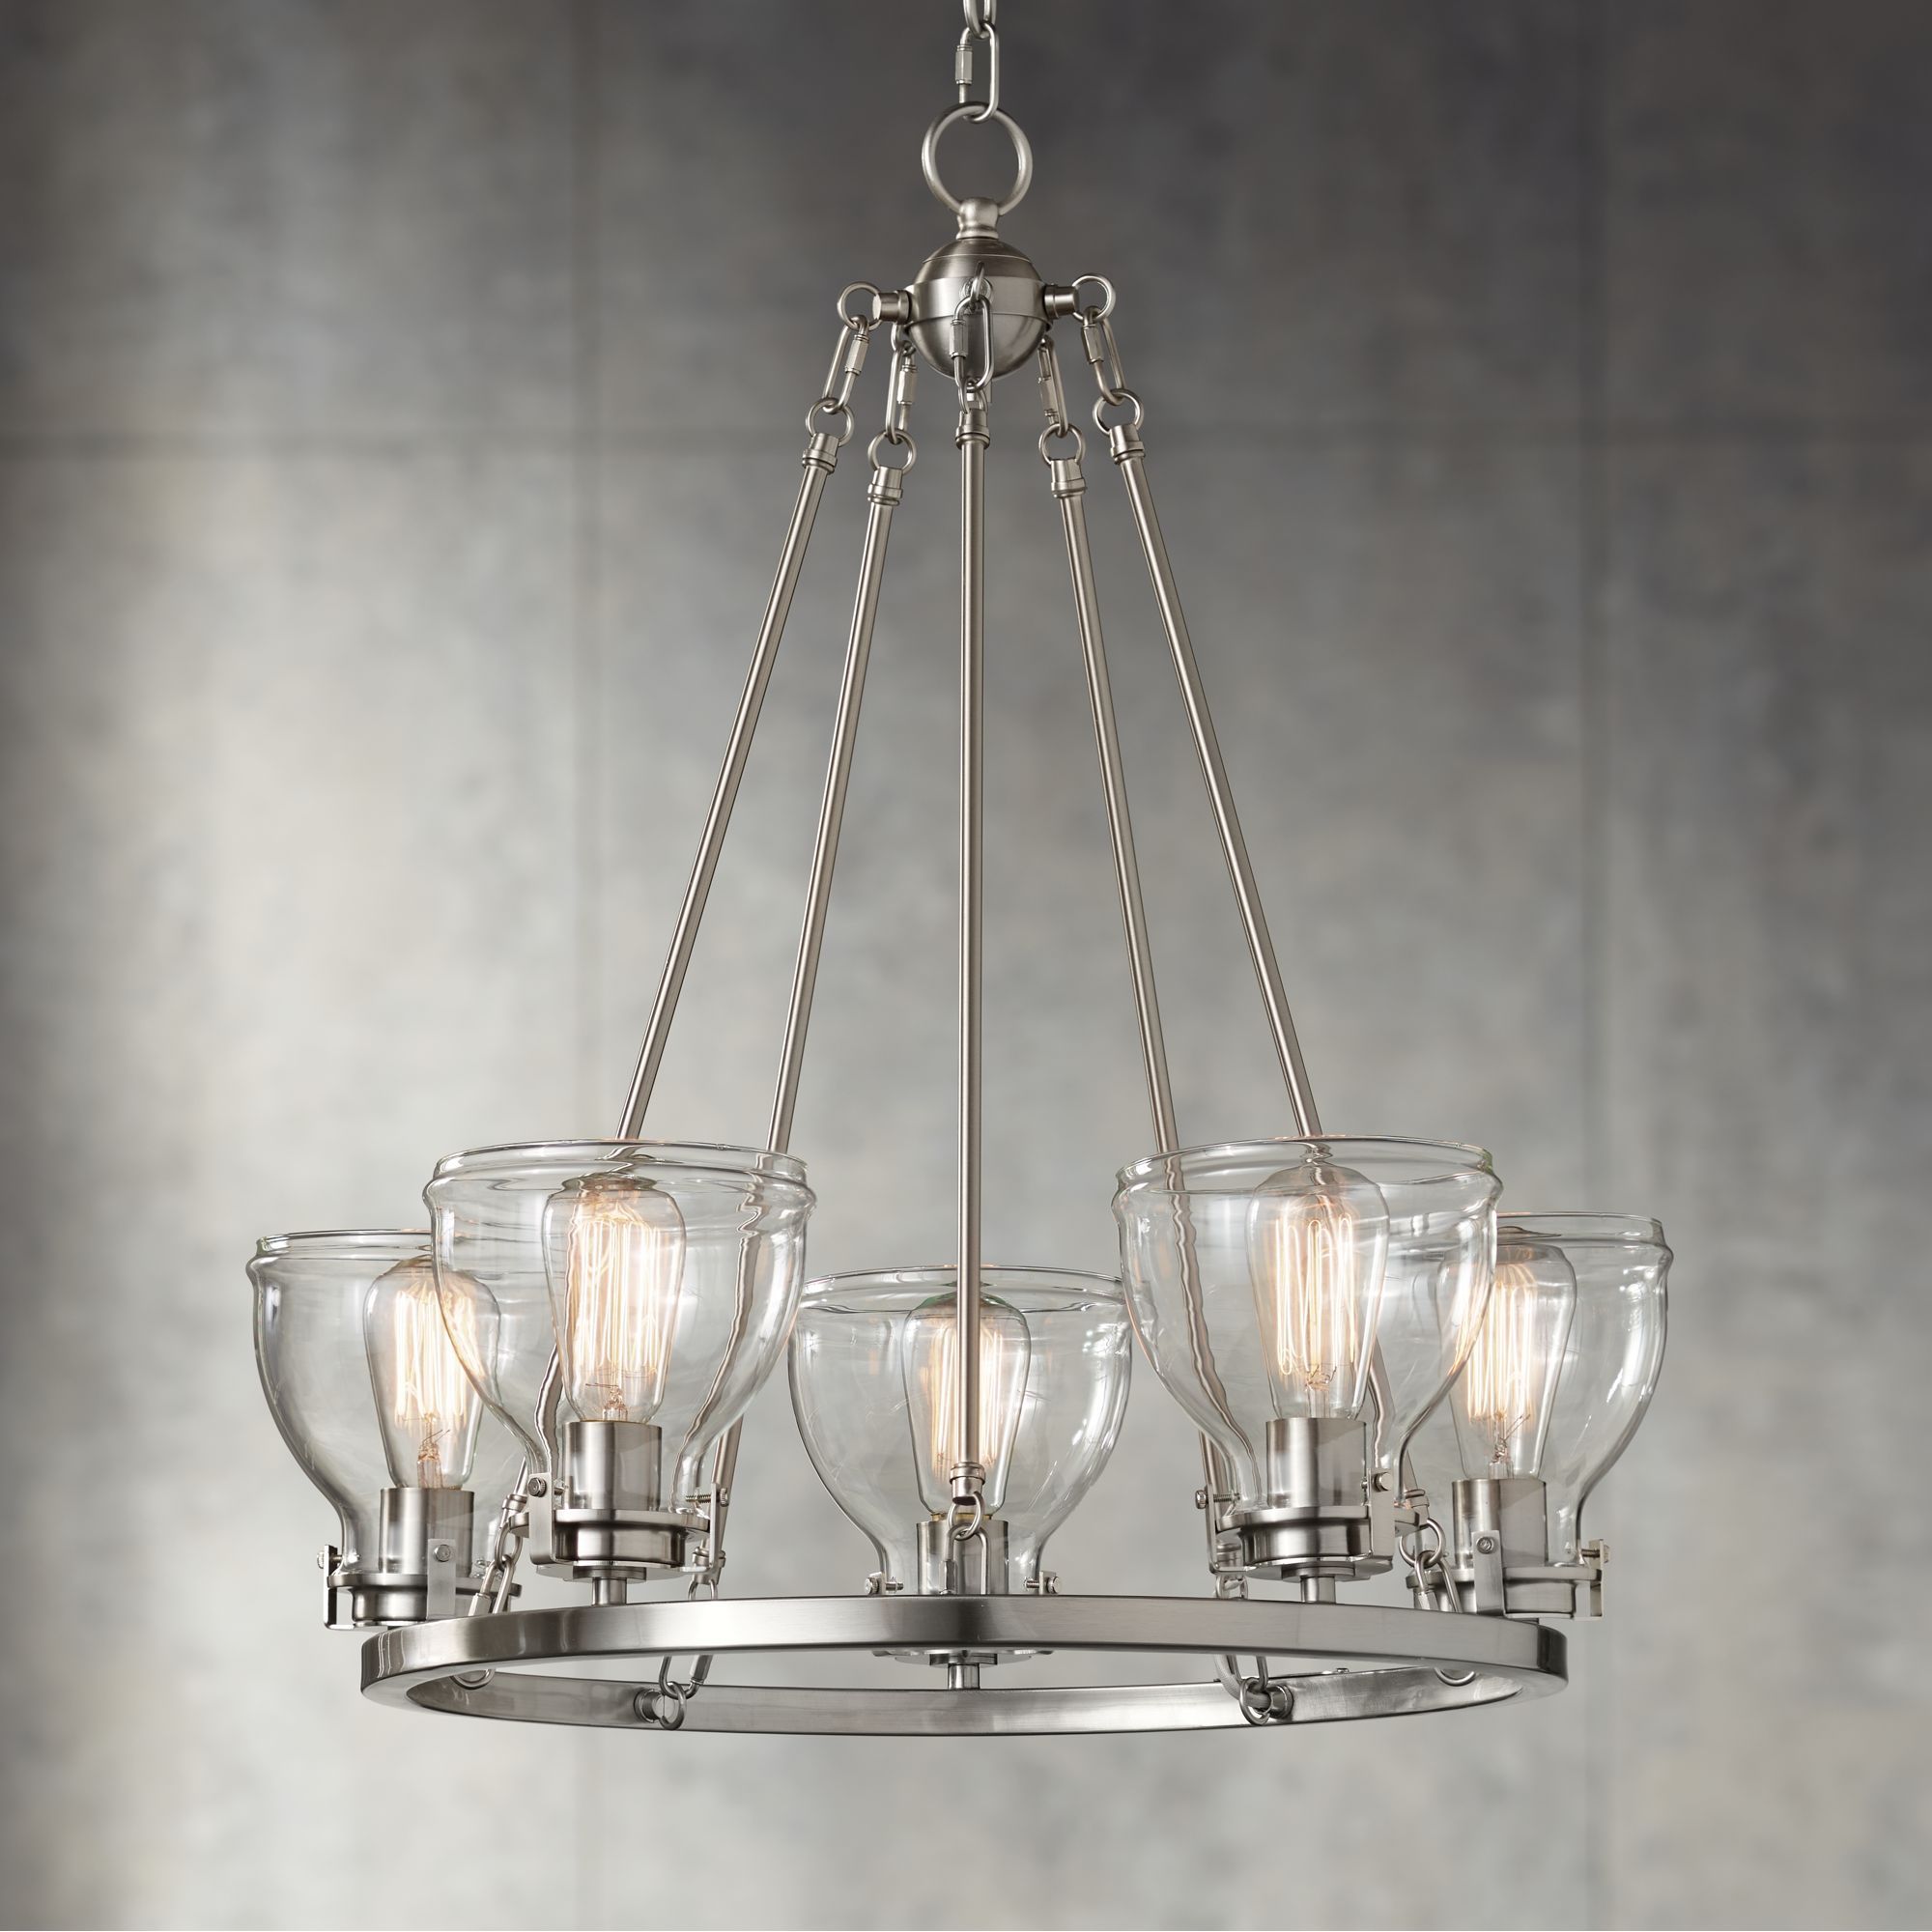 Possini Euro Design Brushed Nickel Round Pendant Within Brushed Nickel Modern Chandeliers (View 12 of 15)